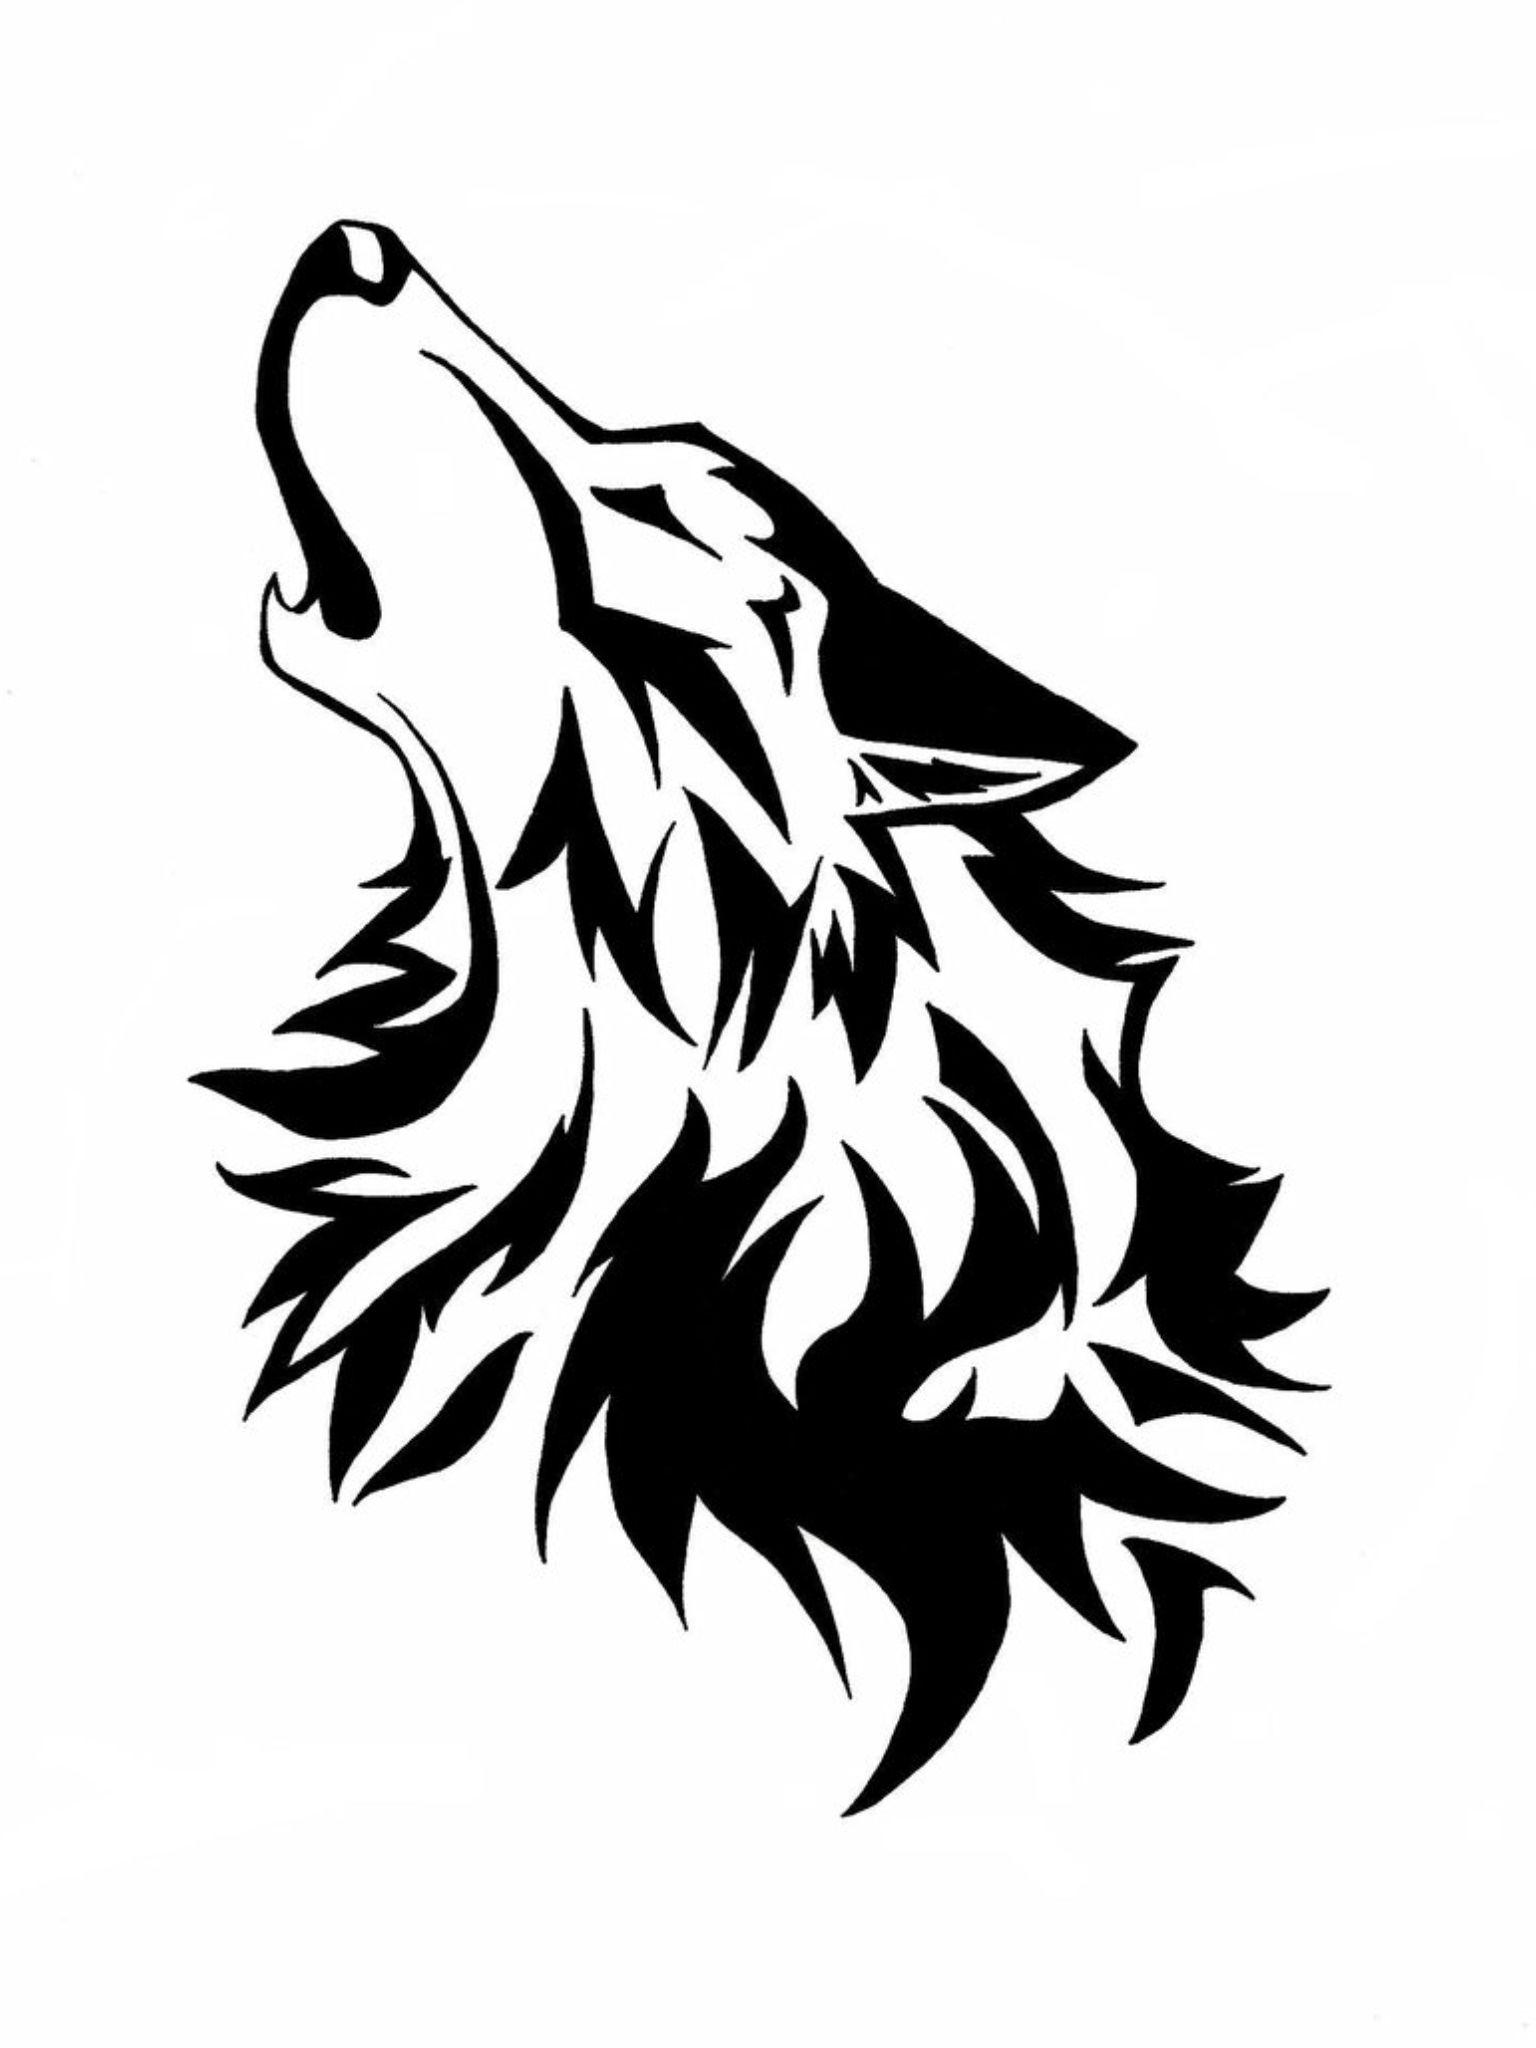 Howling Wolf Head Logo - Free Howling Wolf Icon 237906 | Download Howling Wolf Icon - 237906